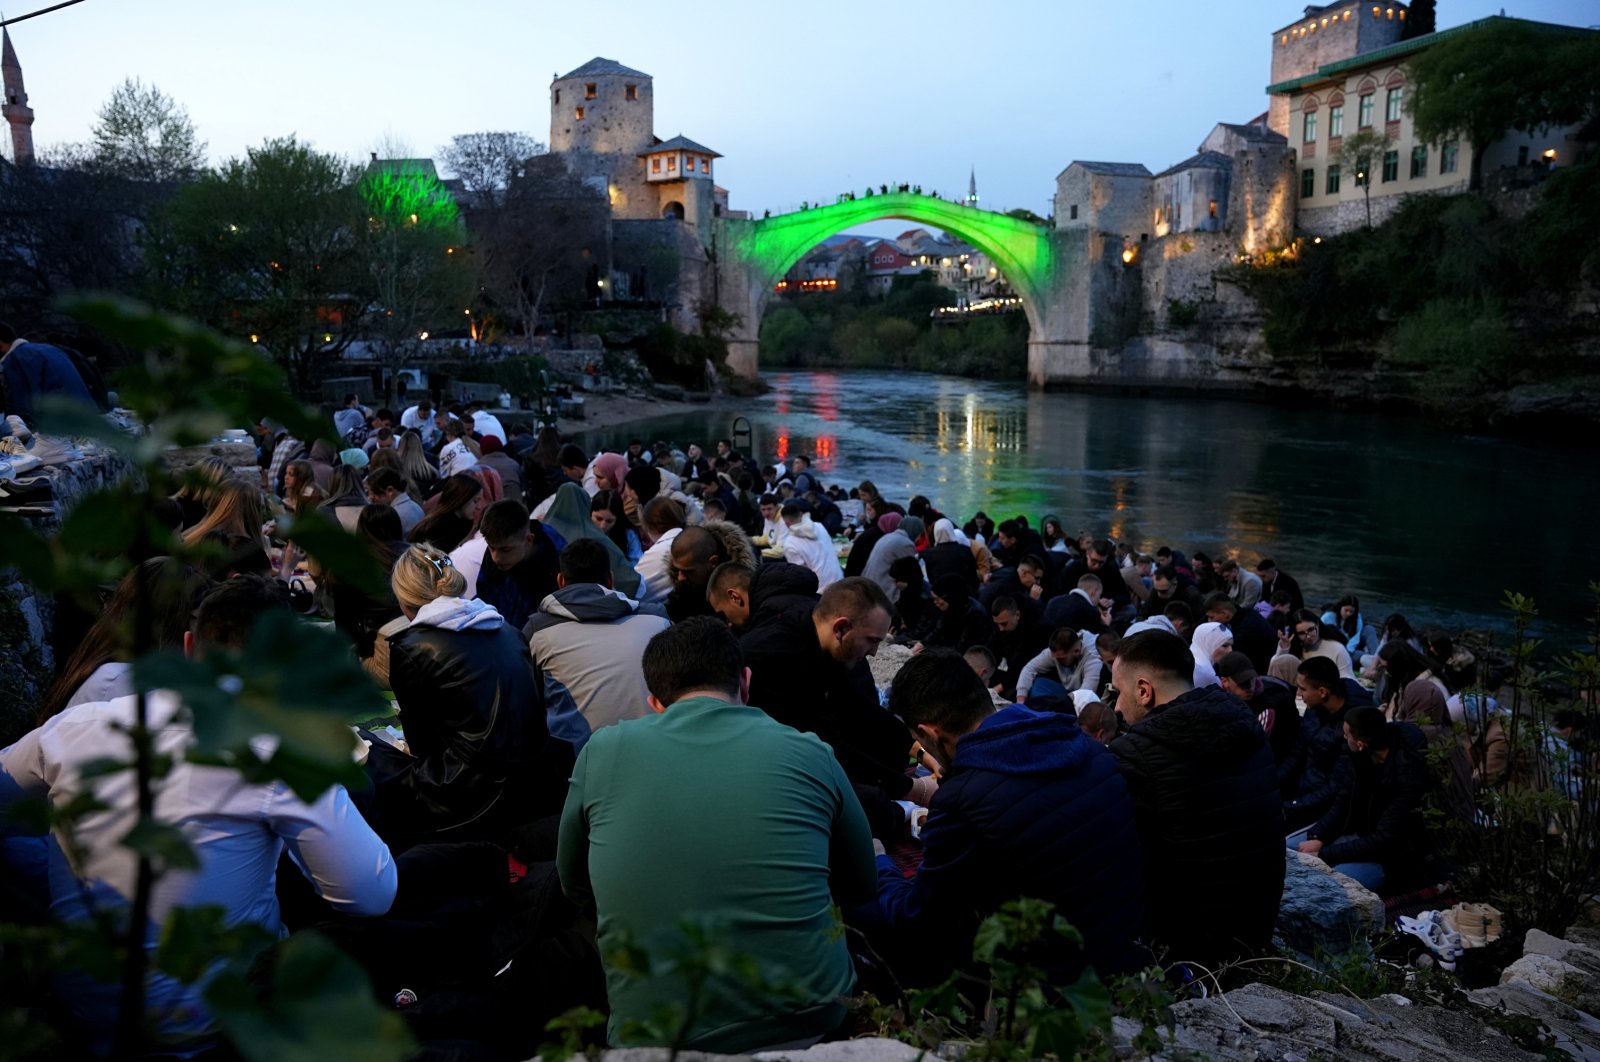 More than a thousand people attend an iftar, a fast-breaking dinner, near the historic Mostar Bridge in the city of Mostar, Bosnia-Herzegovina, April 12, 2023. (AA Photo)